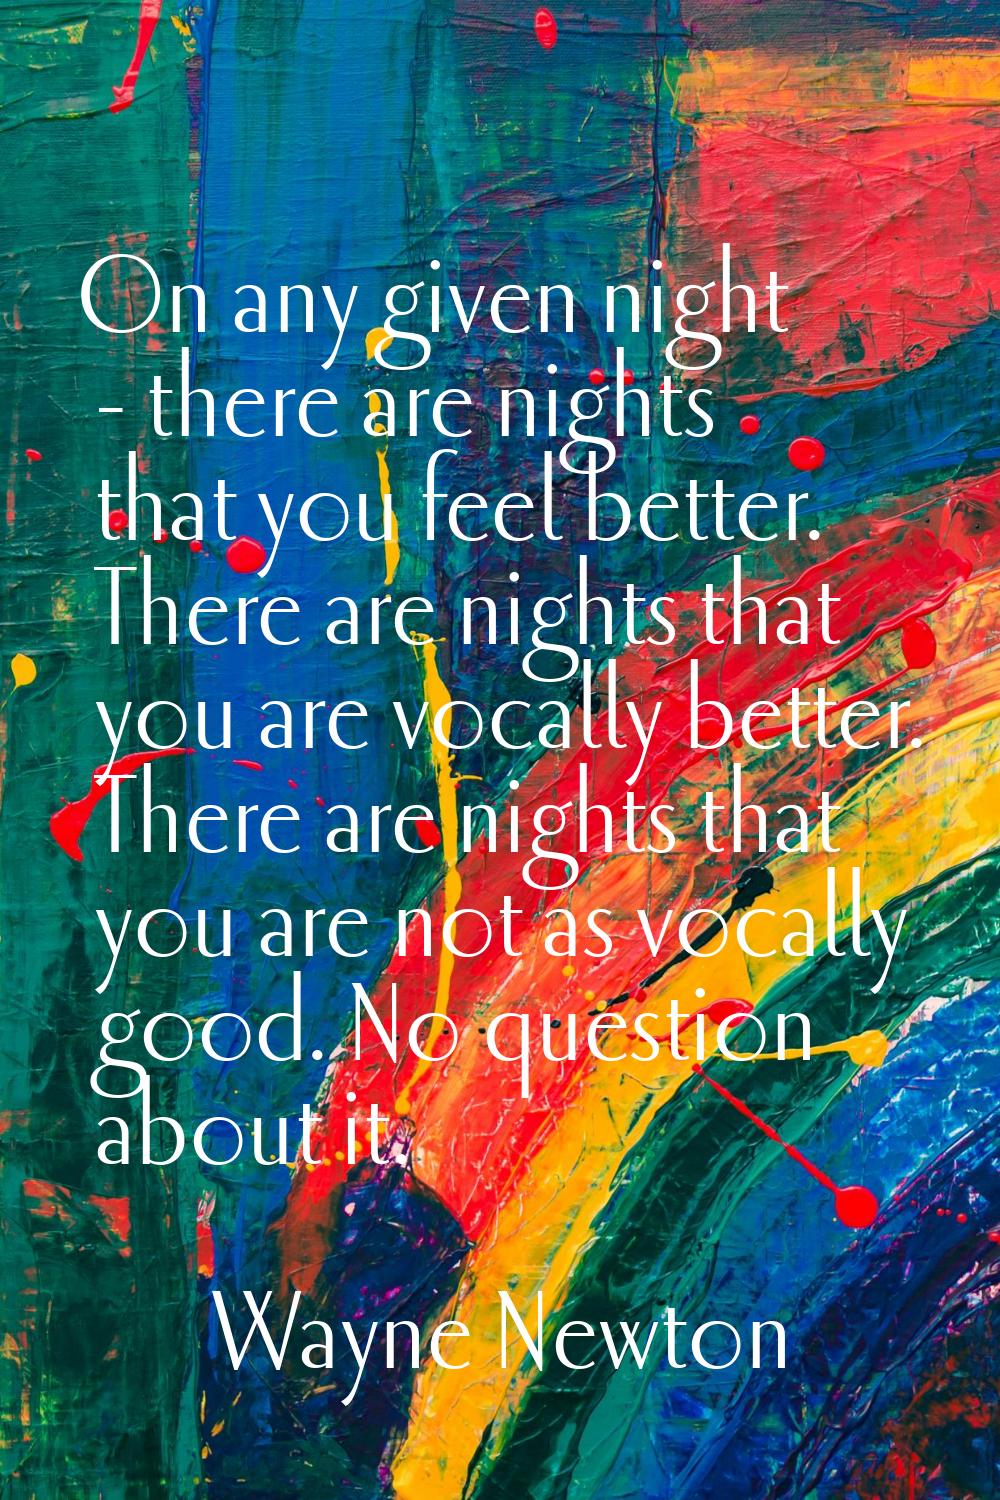 On any given night - there are nights that you feel better. There are nights that you are vocally b